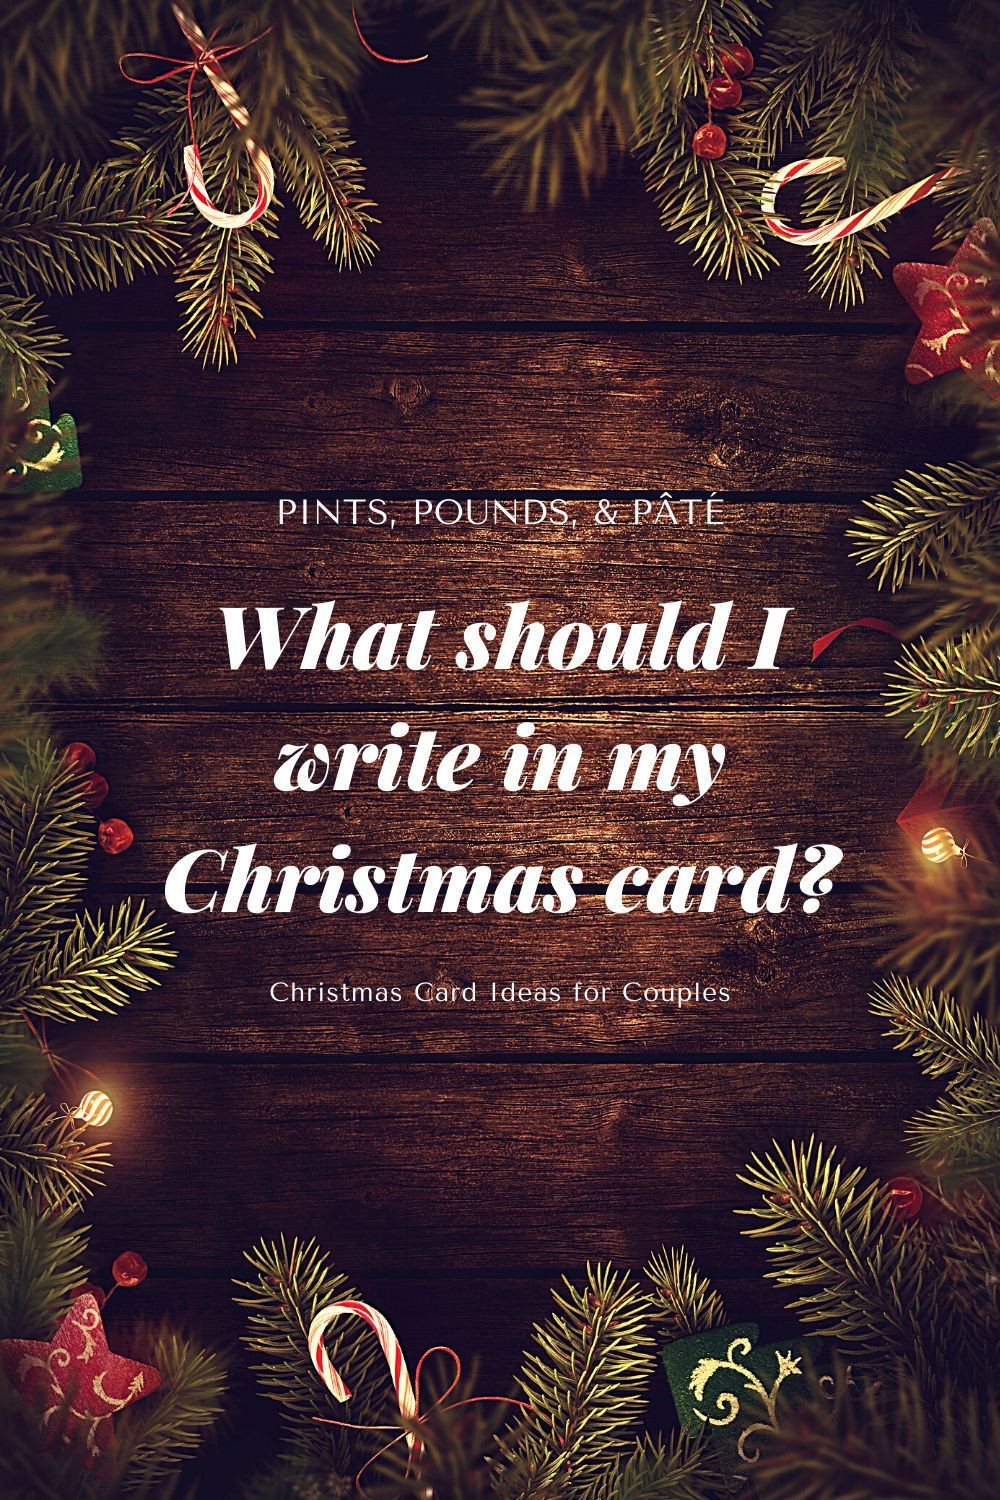 Gift Card Ideas For Couples
 Christmas Card Ideas for Couples in 2020